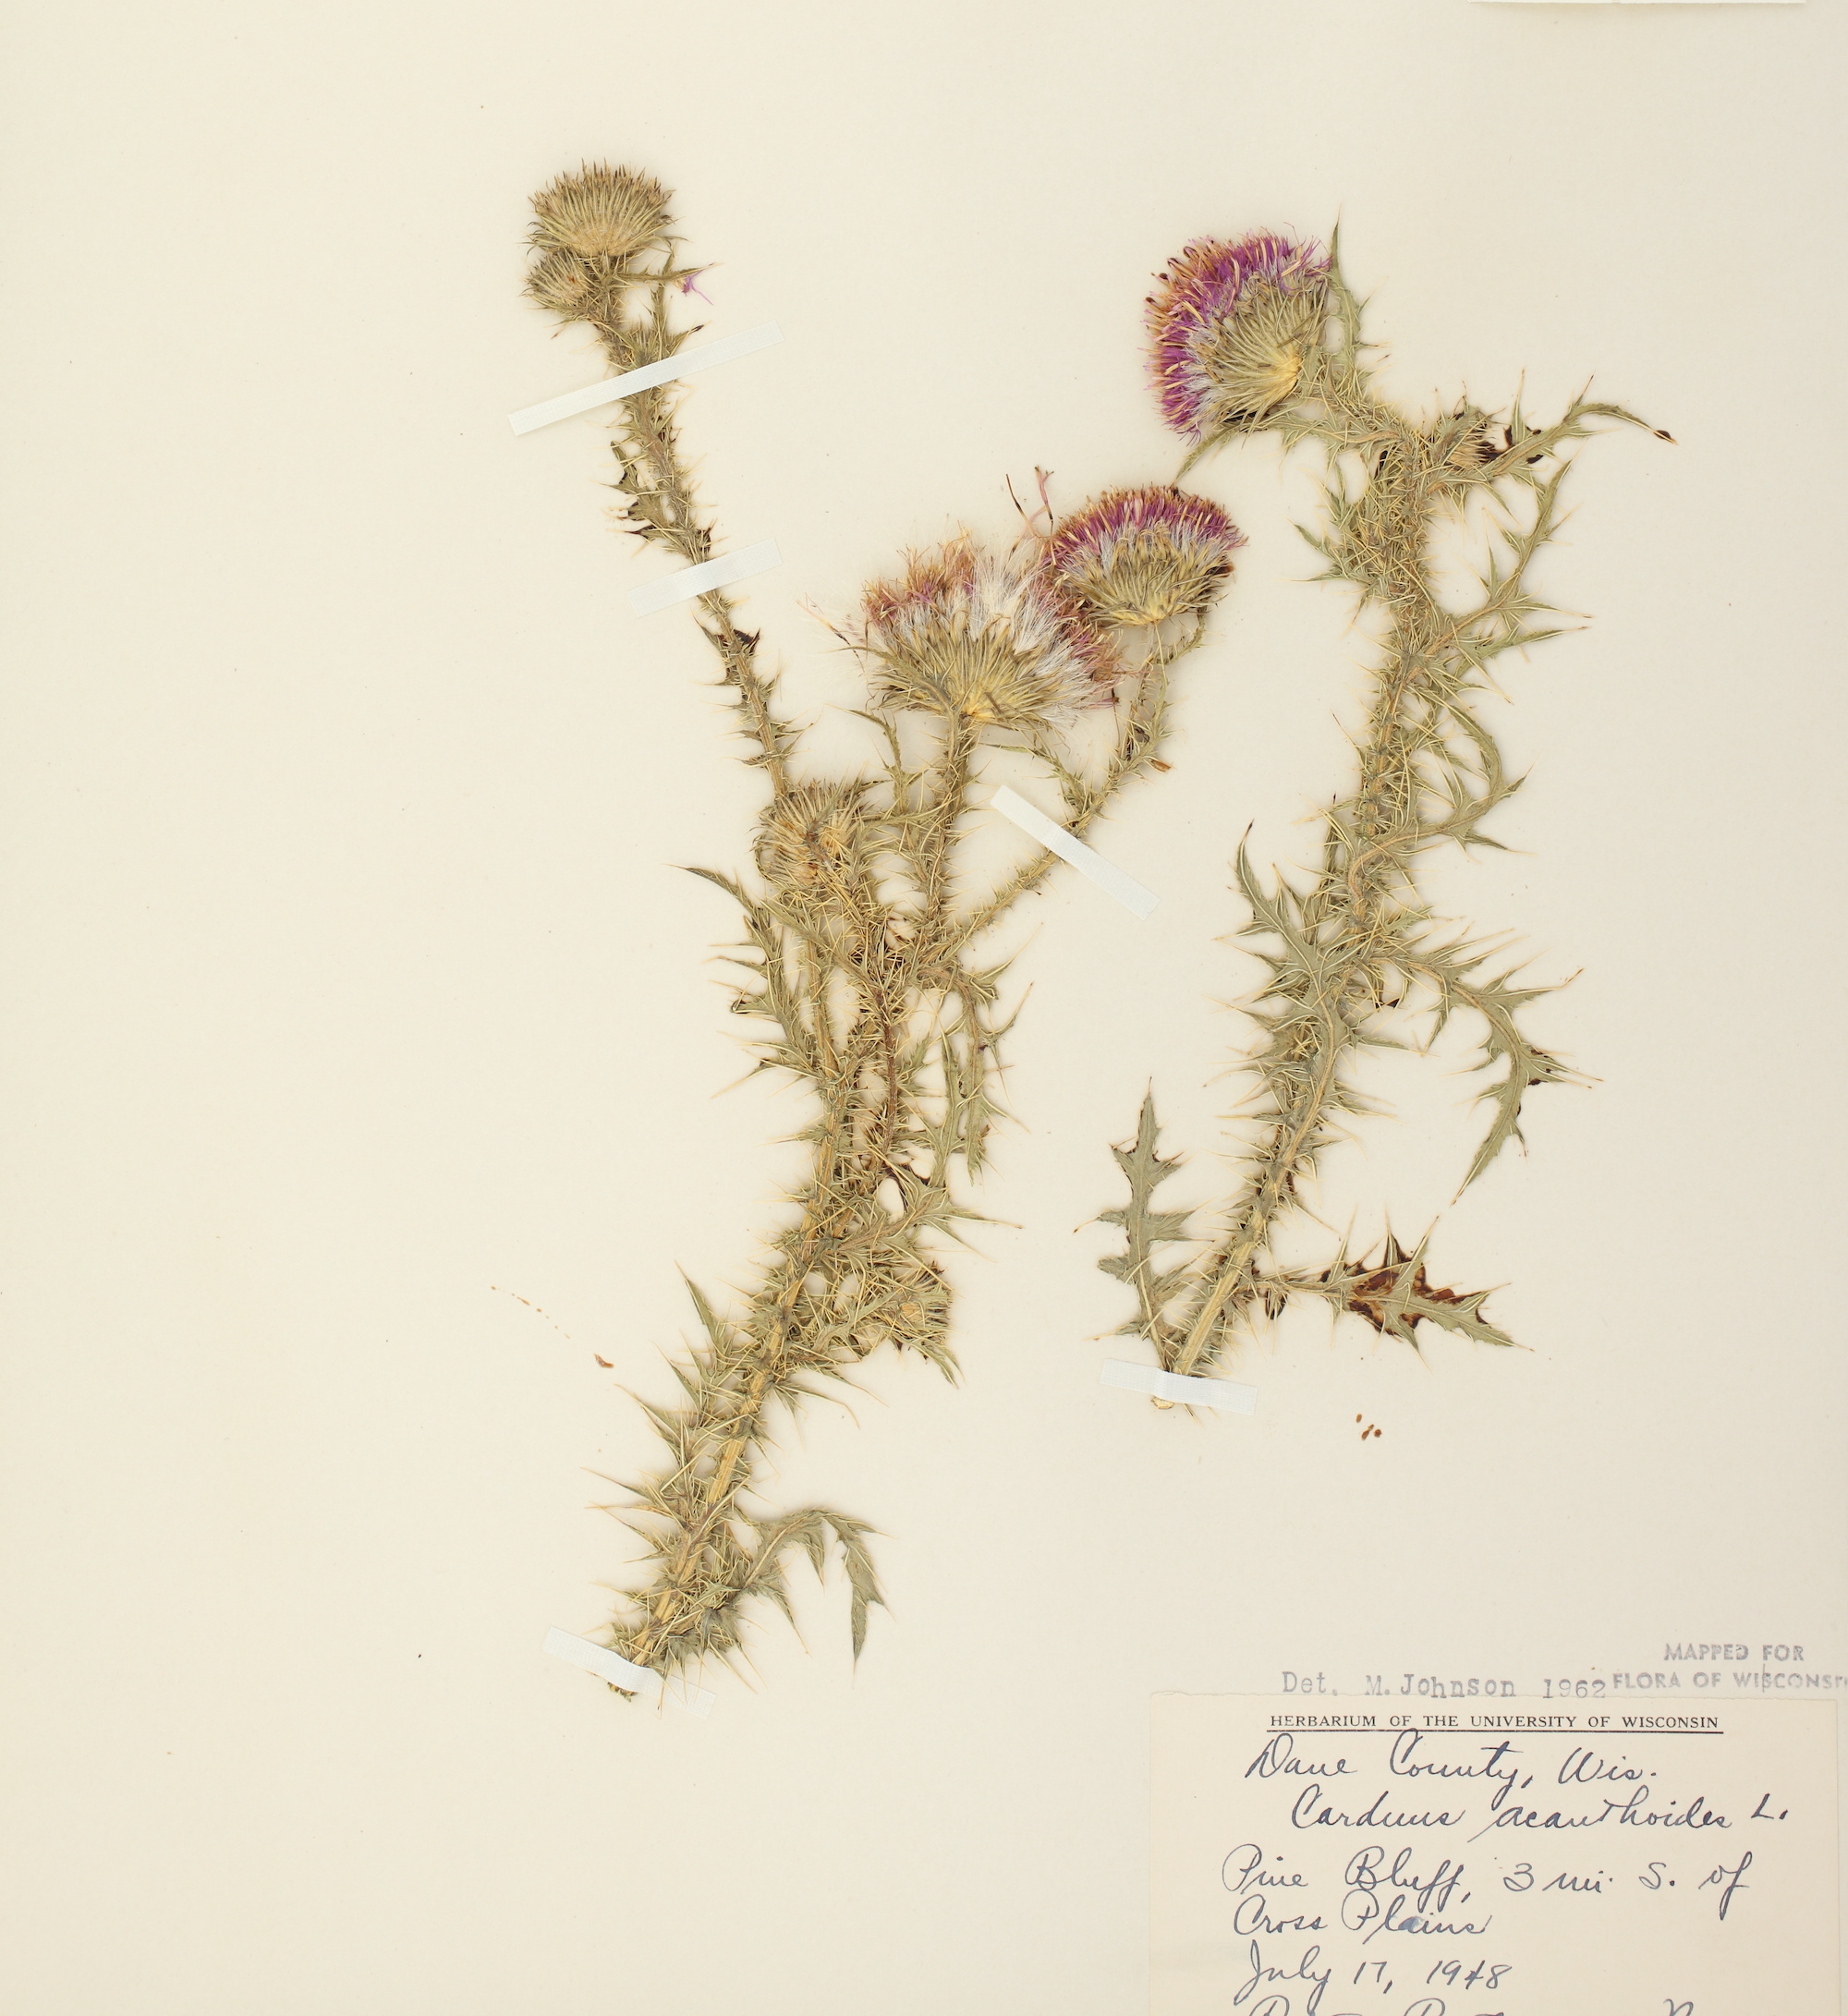 Plumeless Thistle specimen collected on July 17, 1948 in Cross Plains in Dane County, Wisconsin.